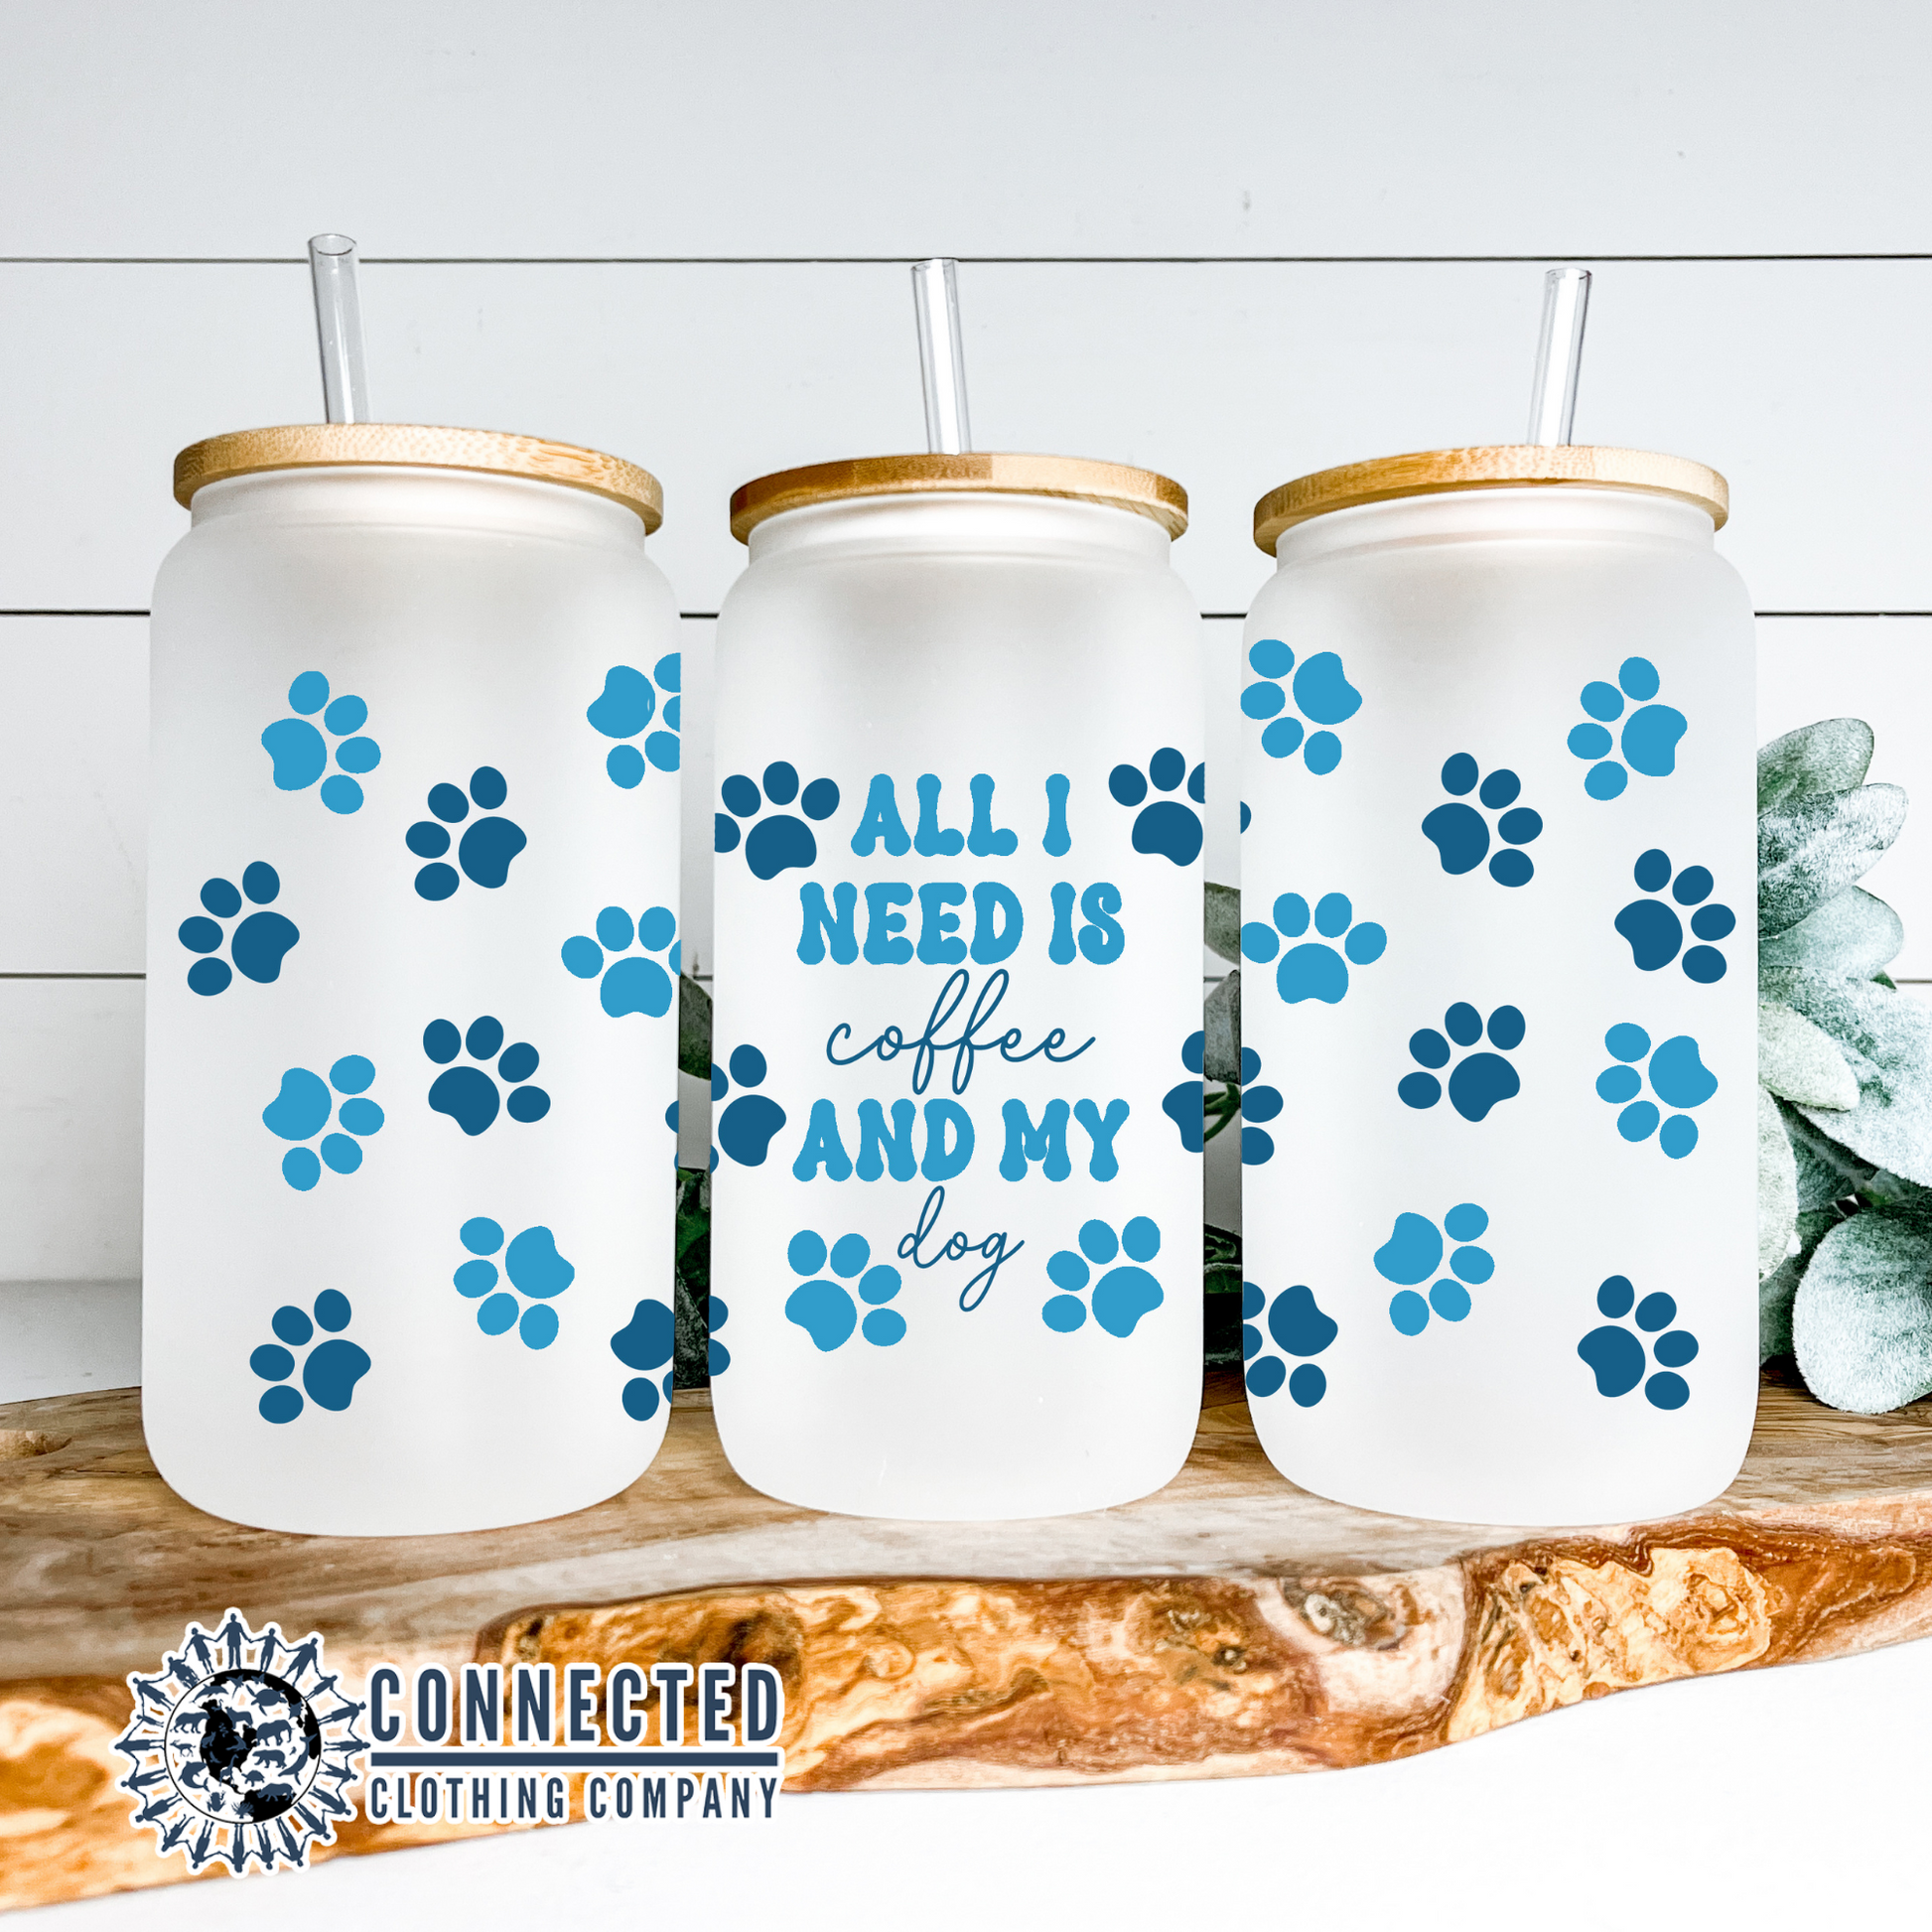 All I Need Is Coffee And My Dog Glass Can - Connected clothing Company - 10% donated to animal rescue